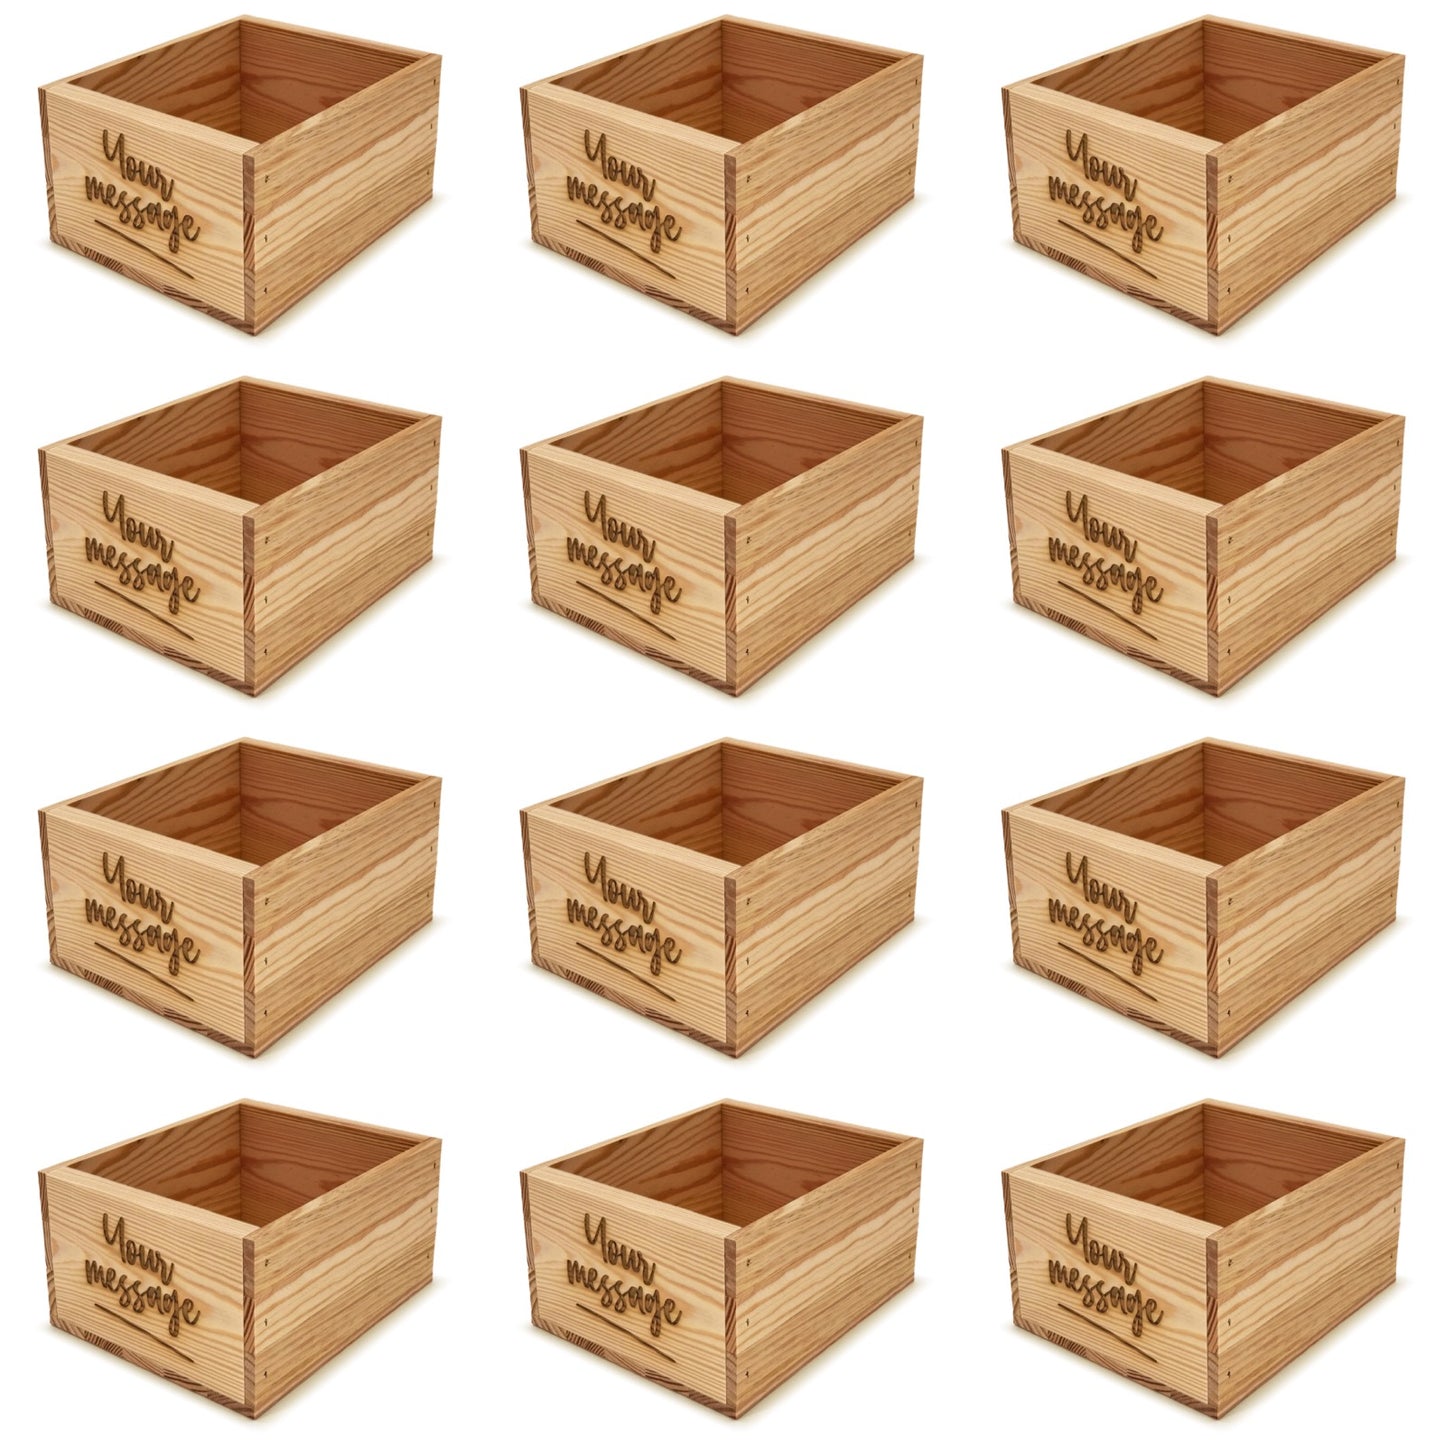 12 Small wooden crates with custom message 9x8x5.25